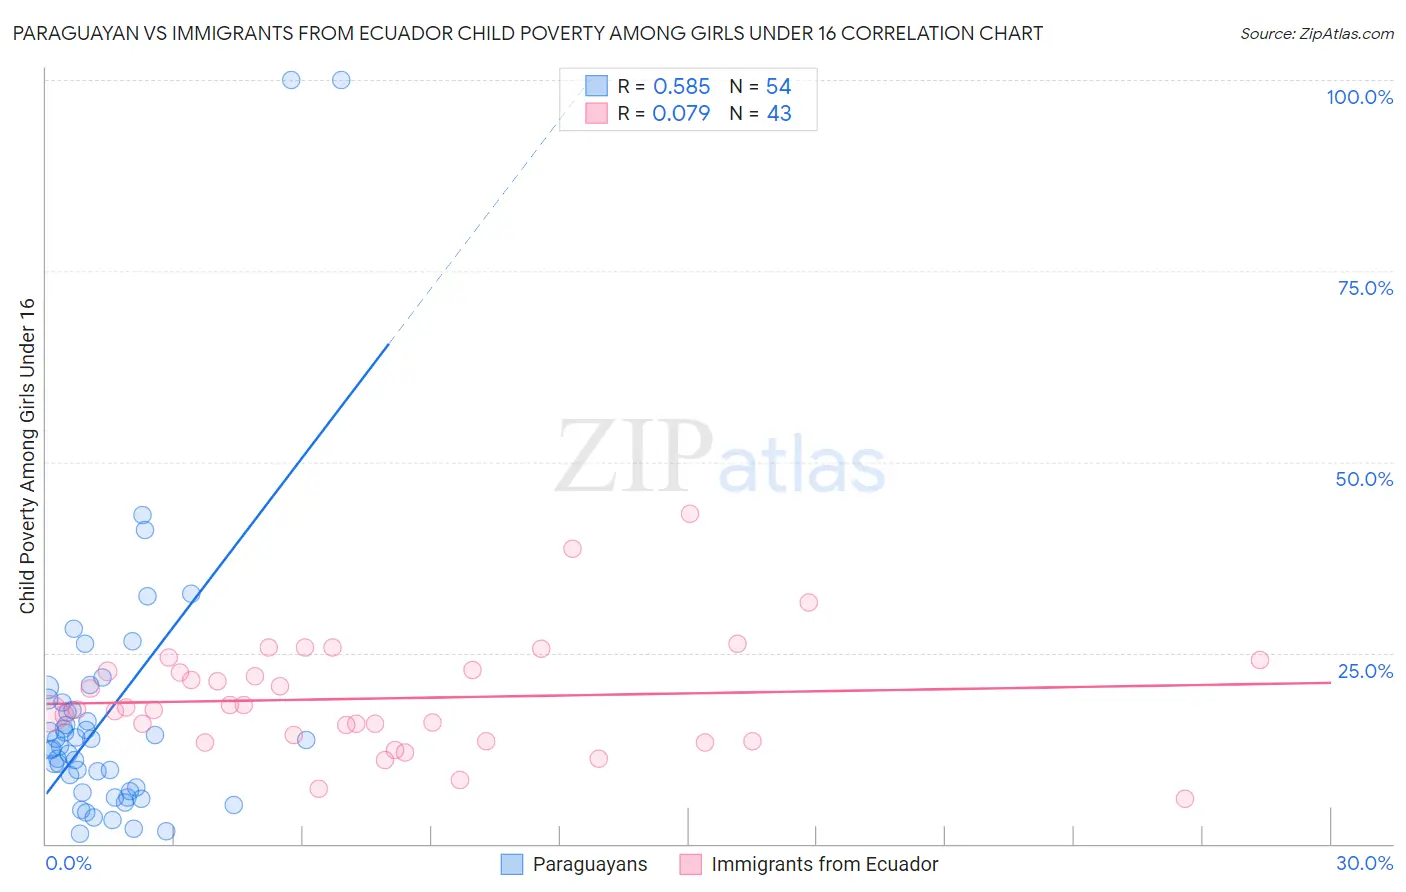 Paraguayan vs Immigrants from Ecuador Child Poverty Among Girls Under 16